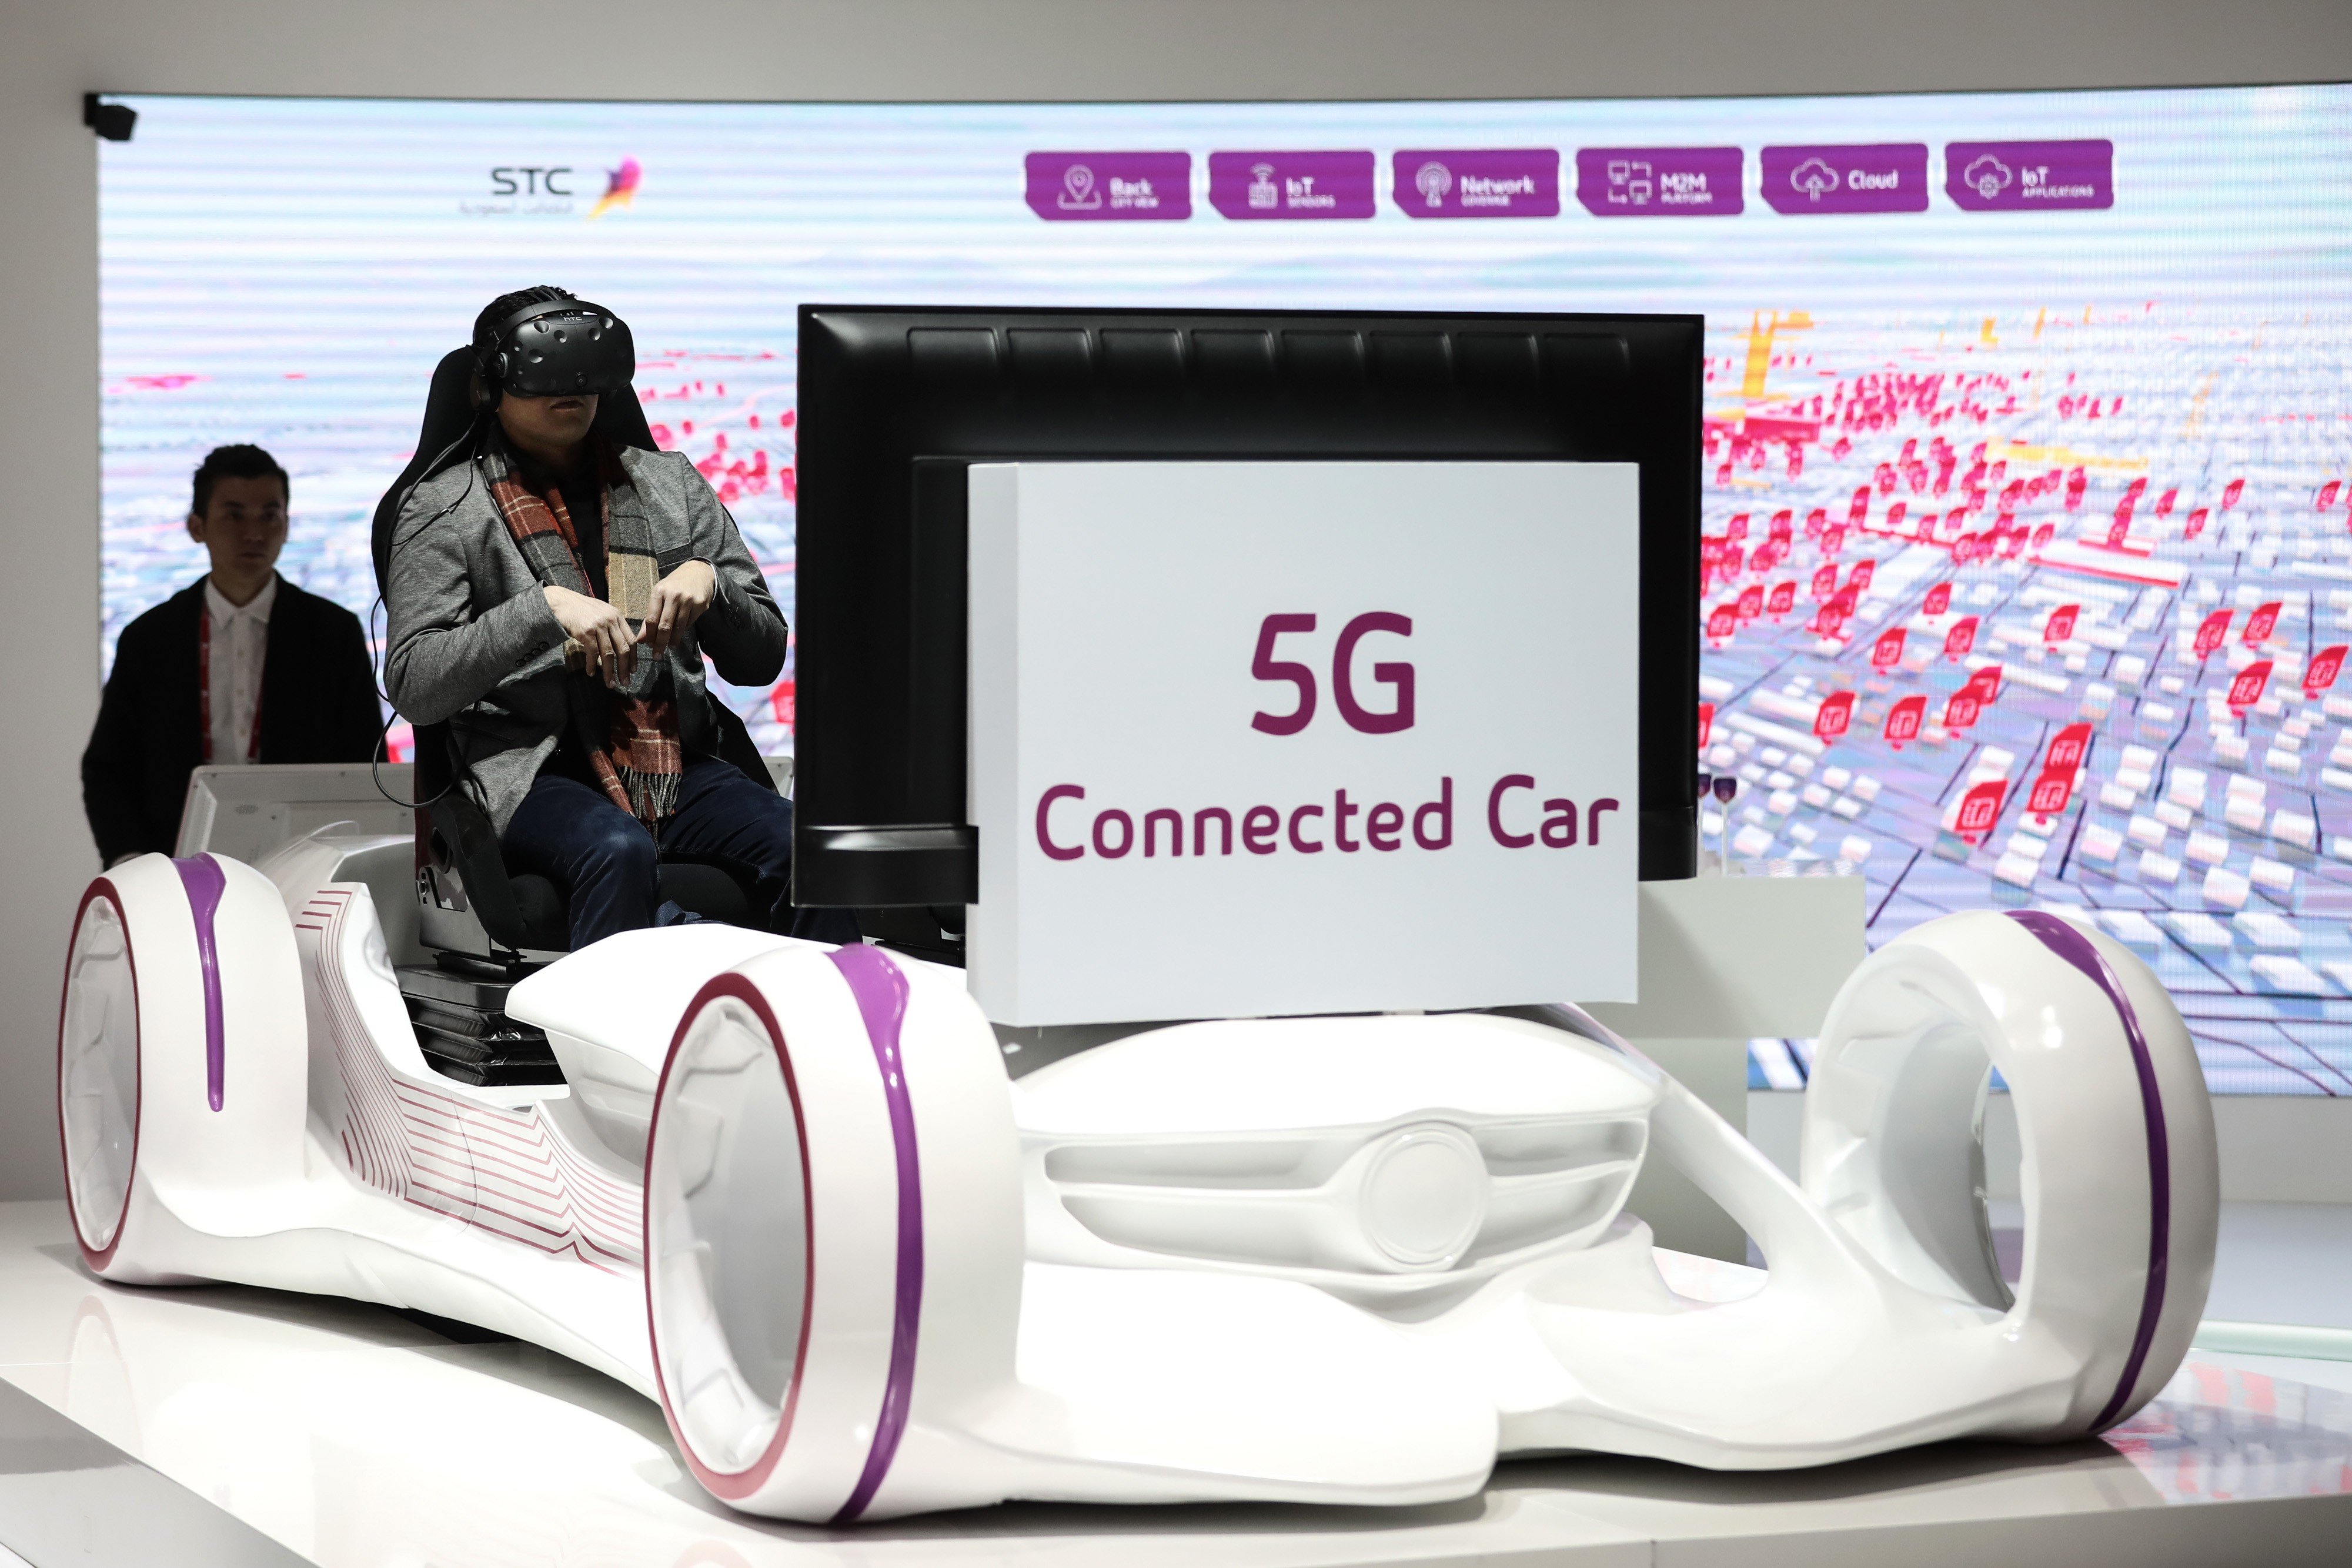 Consumers can expect the hype over 5G to increase over the next two years as authorities complete the technical standard and spectrum allocation for the advanced mobile system